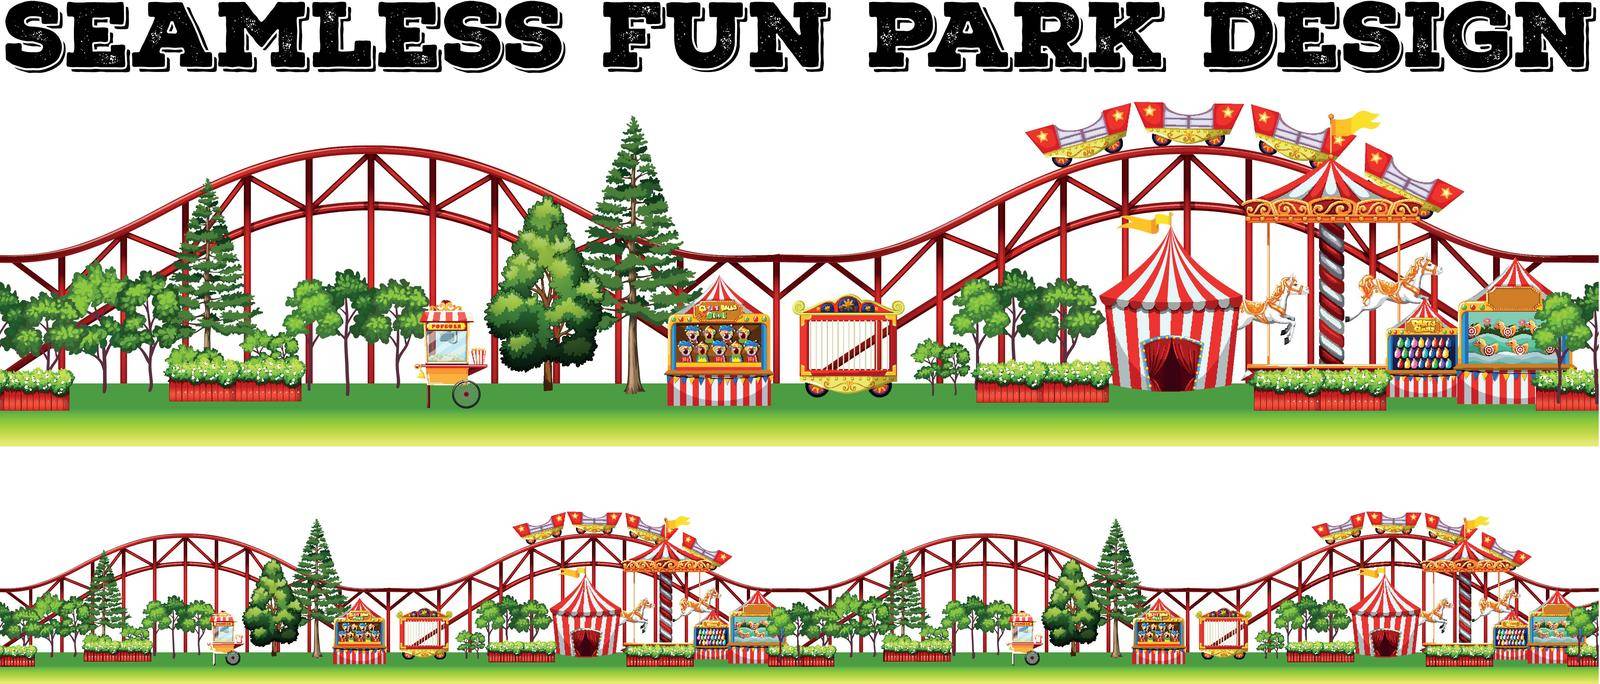 Seamless fun park design with many rides illustration